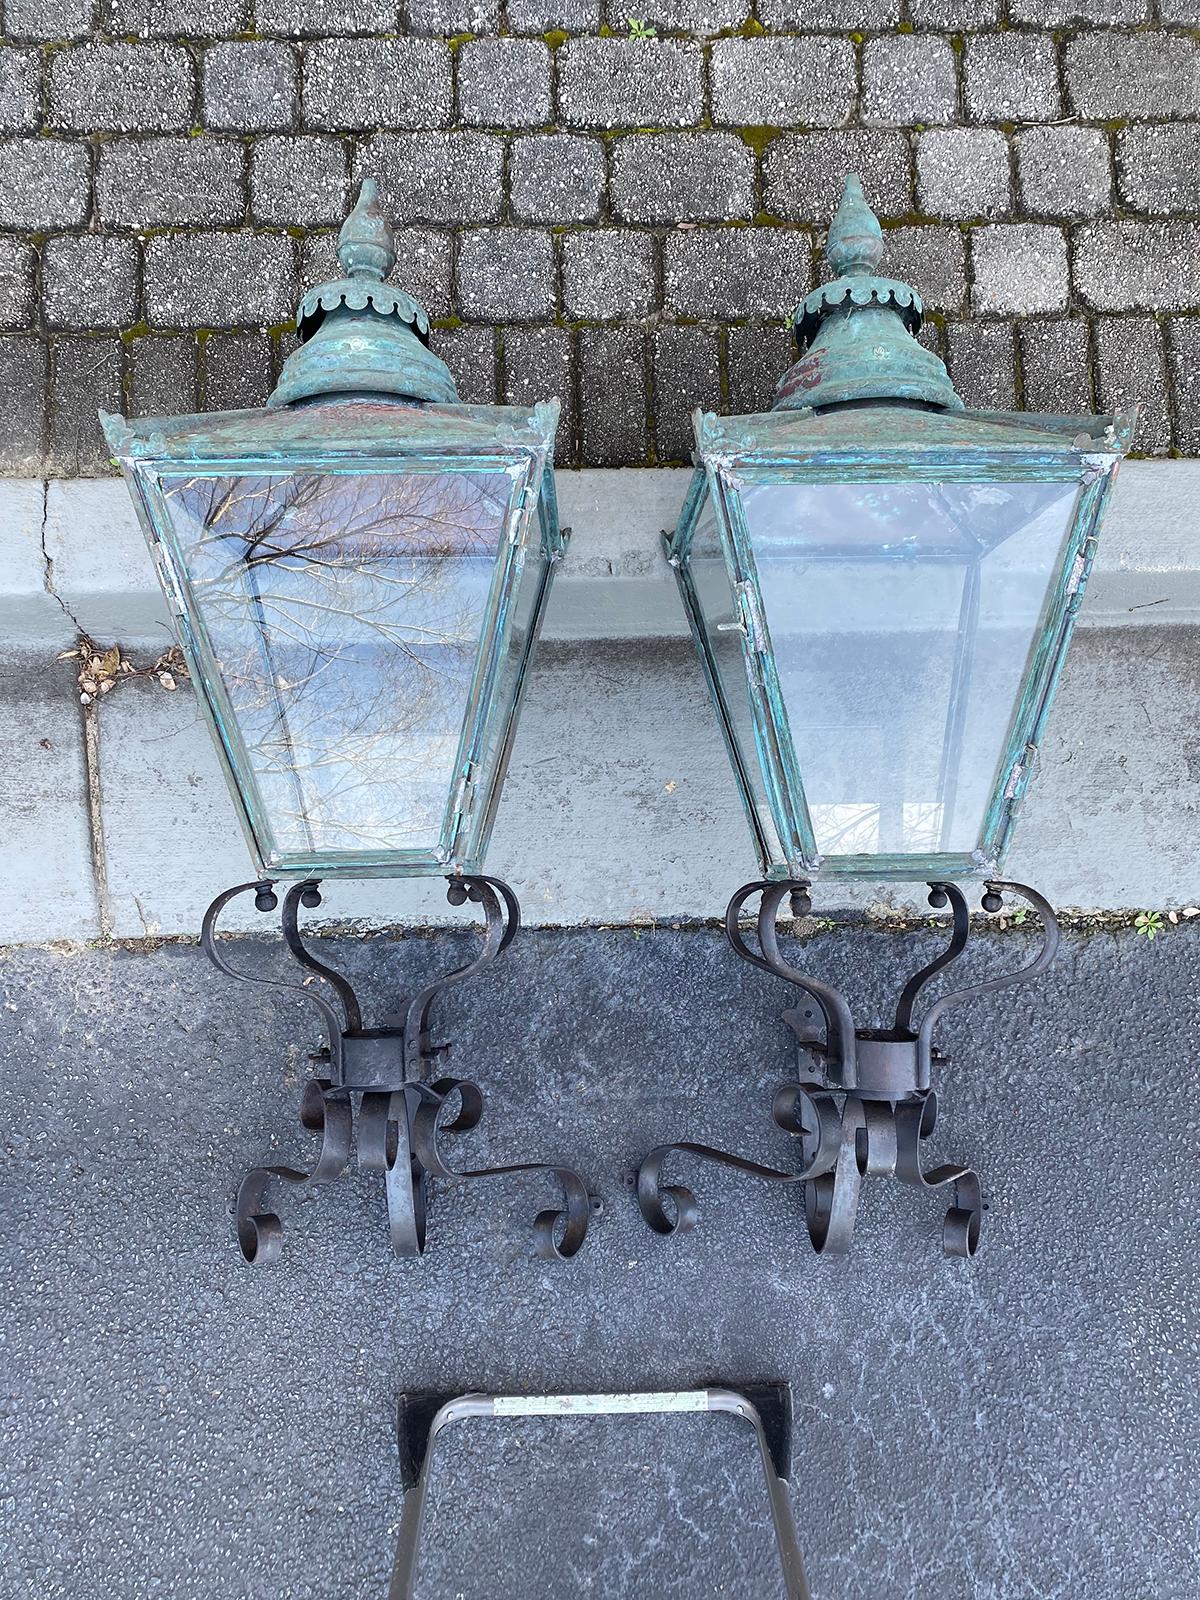 Pair large 19th century English copper wall lanterns with 20th century iron brackets.
Not wired can take gas.